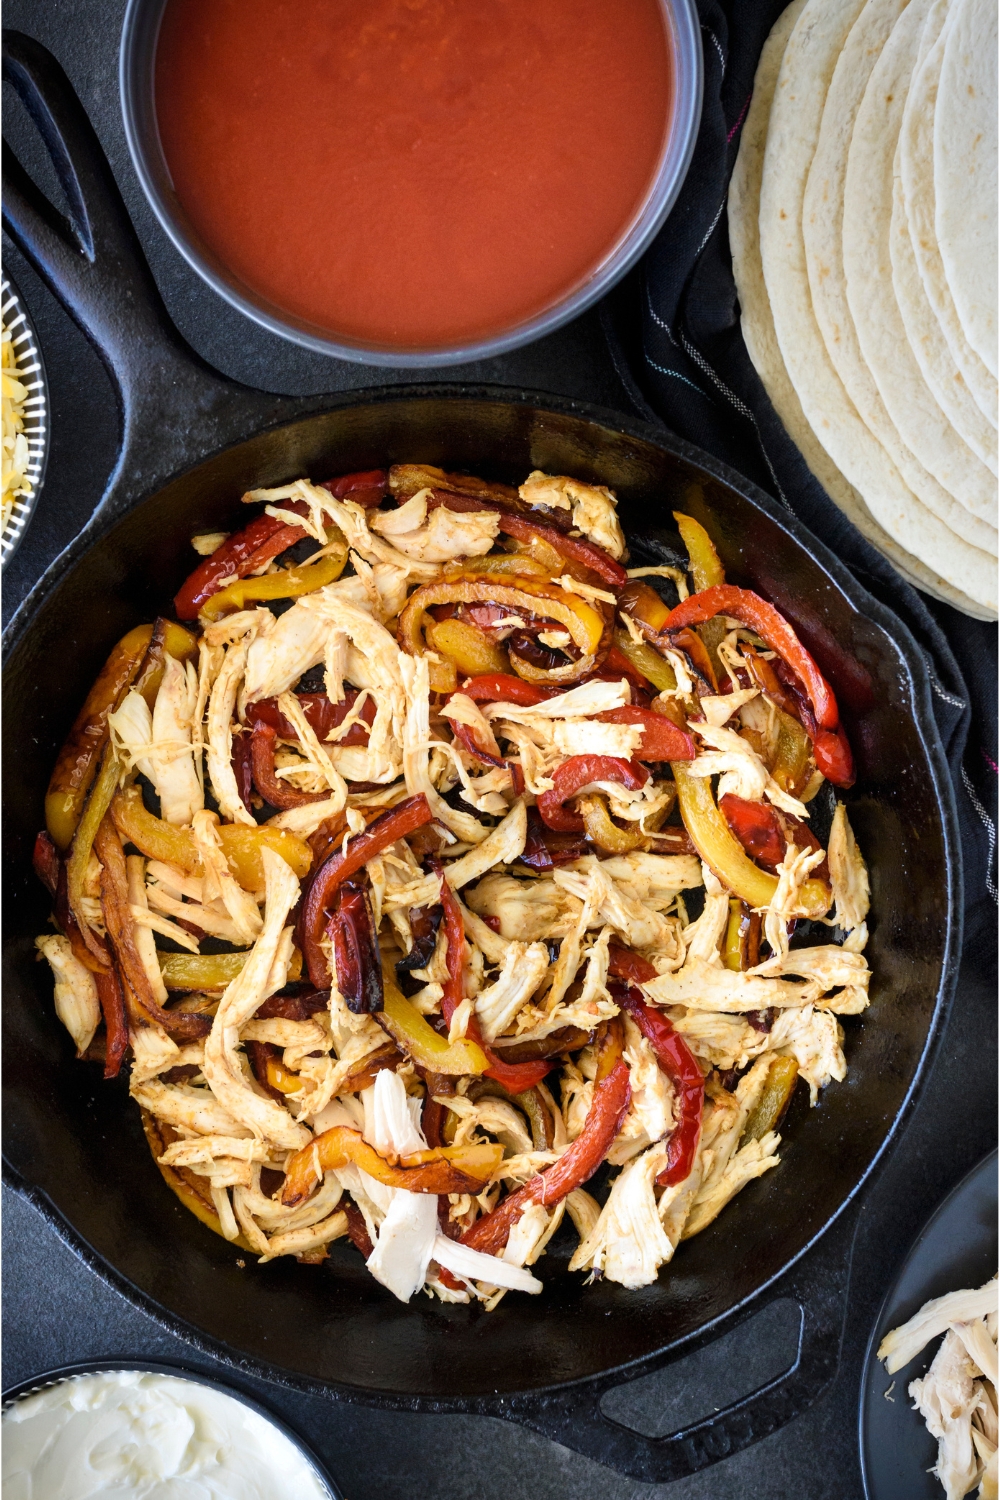 A black cast iron skillet with sautéed bell peppers and shredded chicken in it.